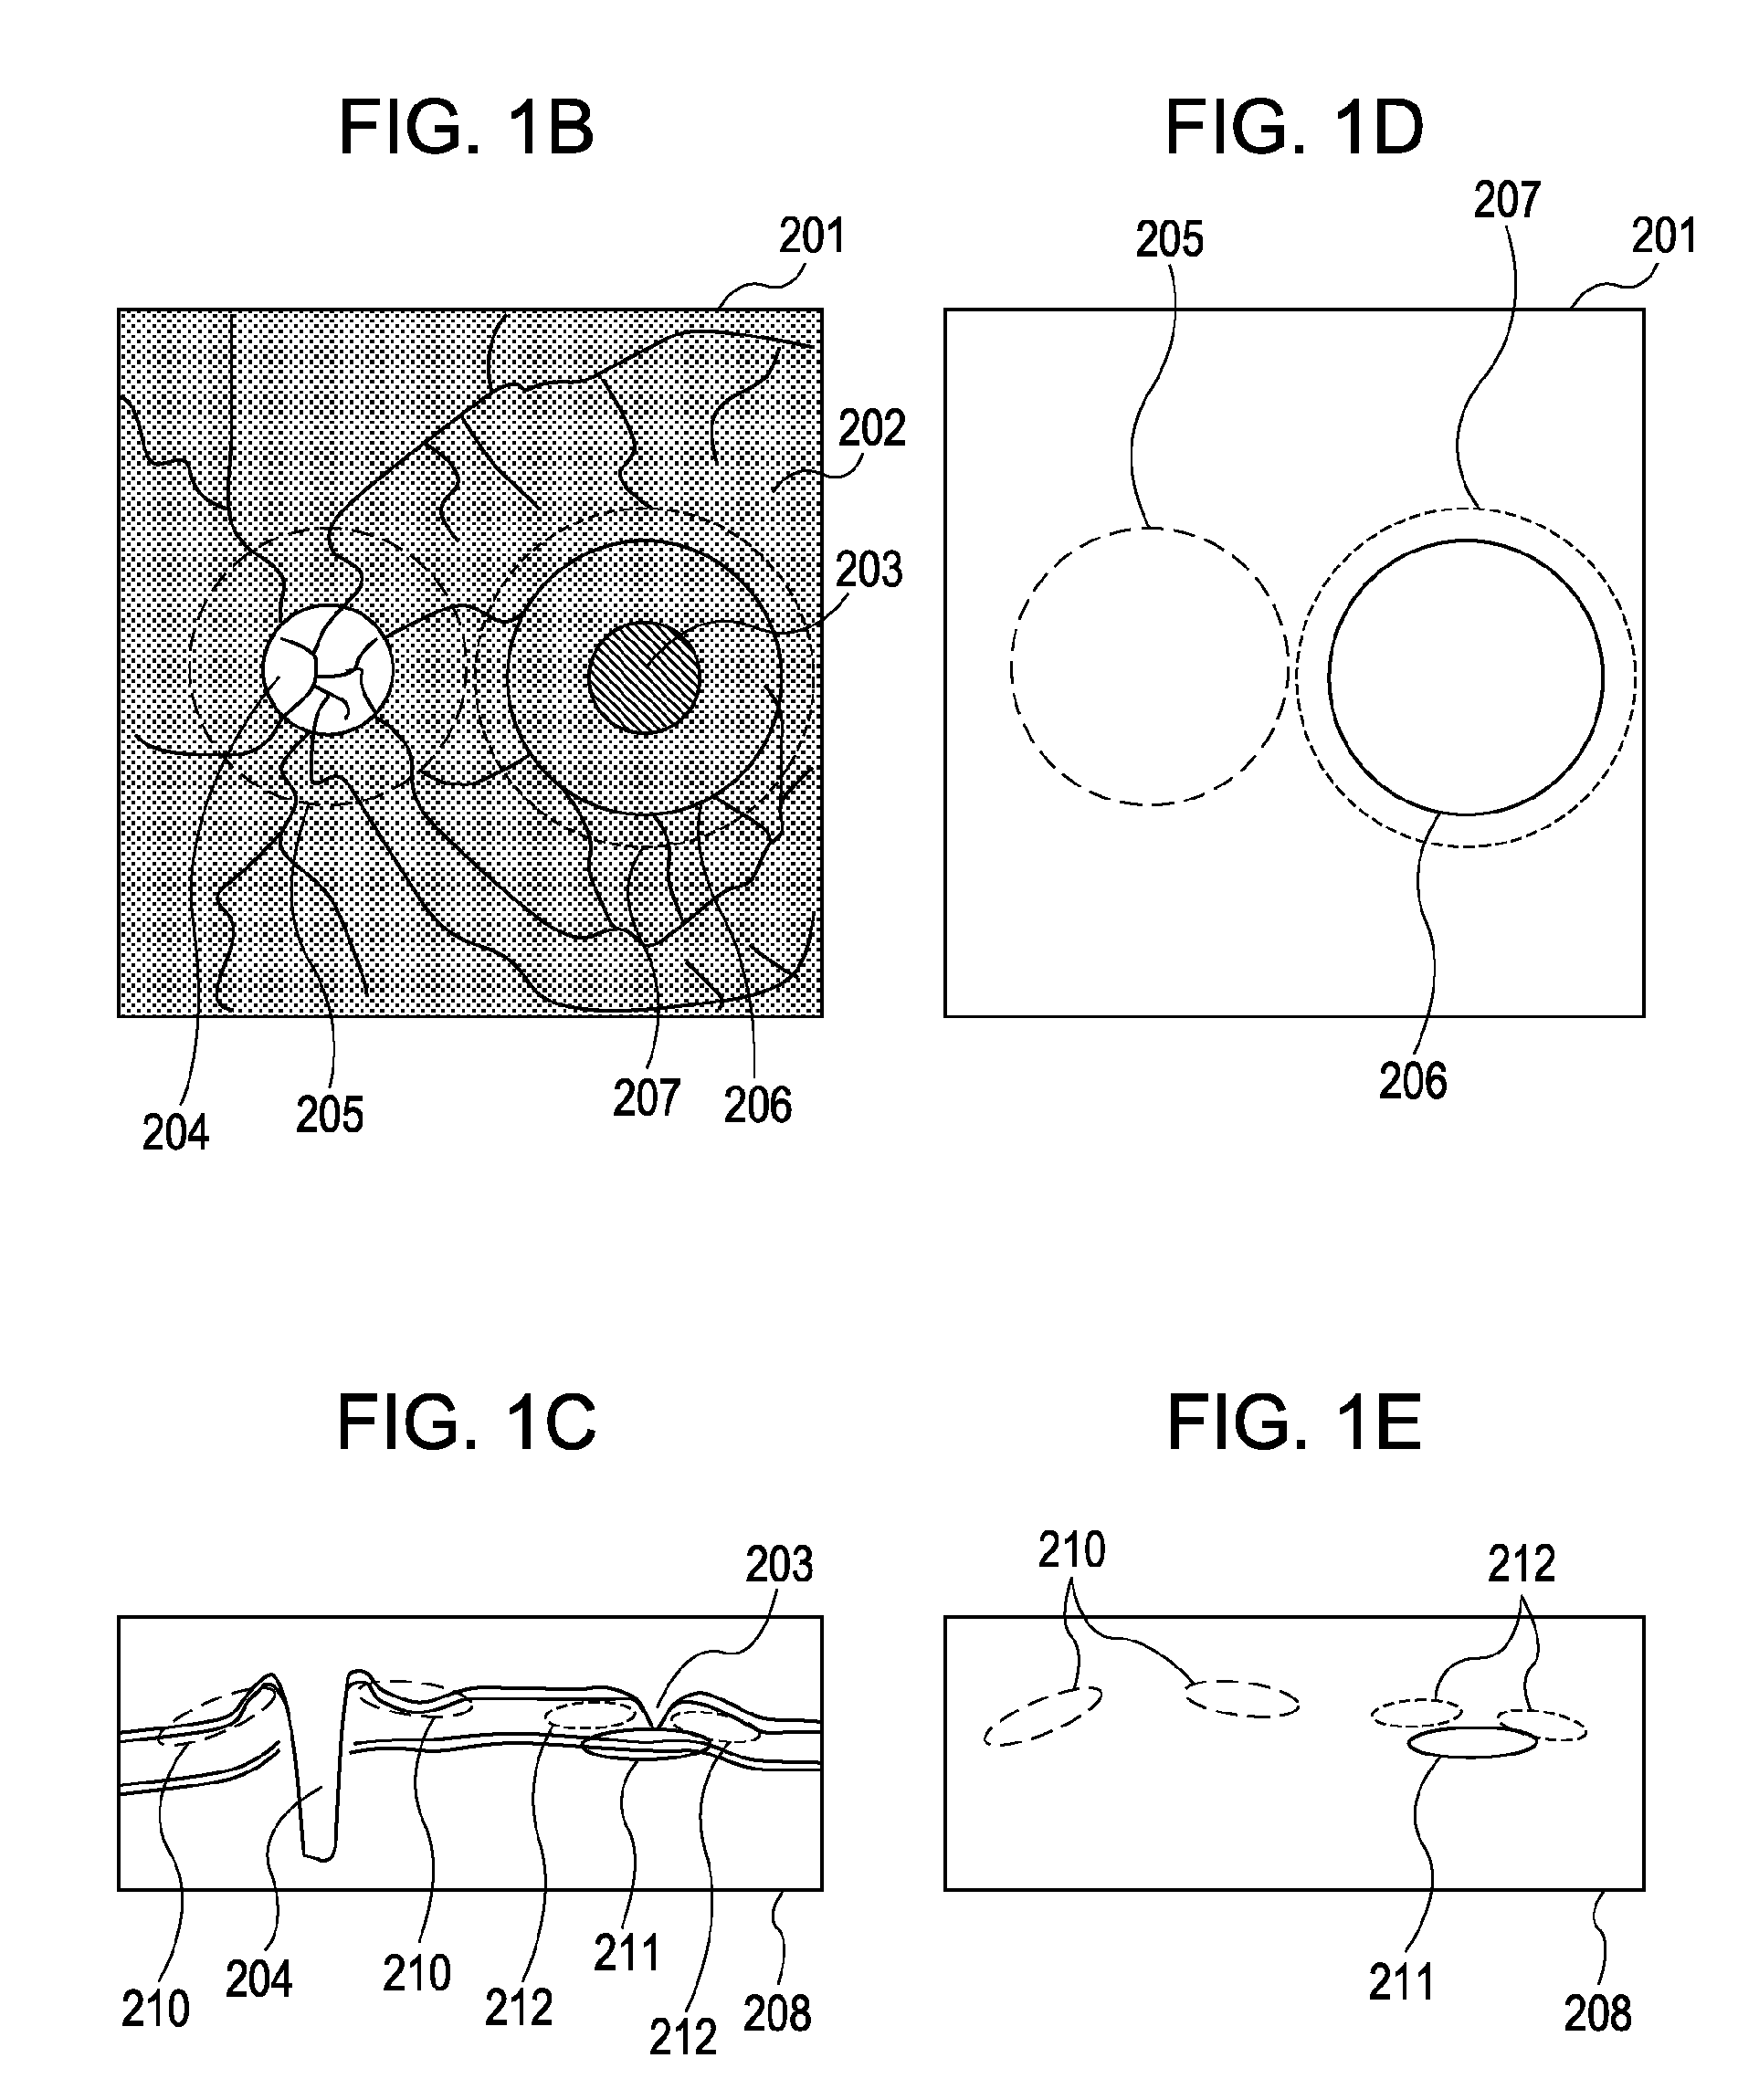 Image acquisition apparatus and image acquisition method using optical coherence tomography